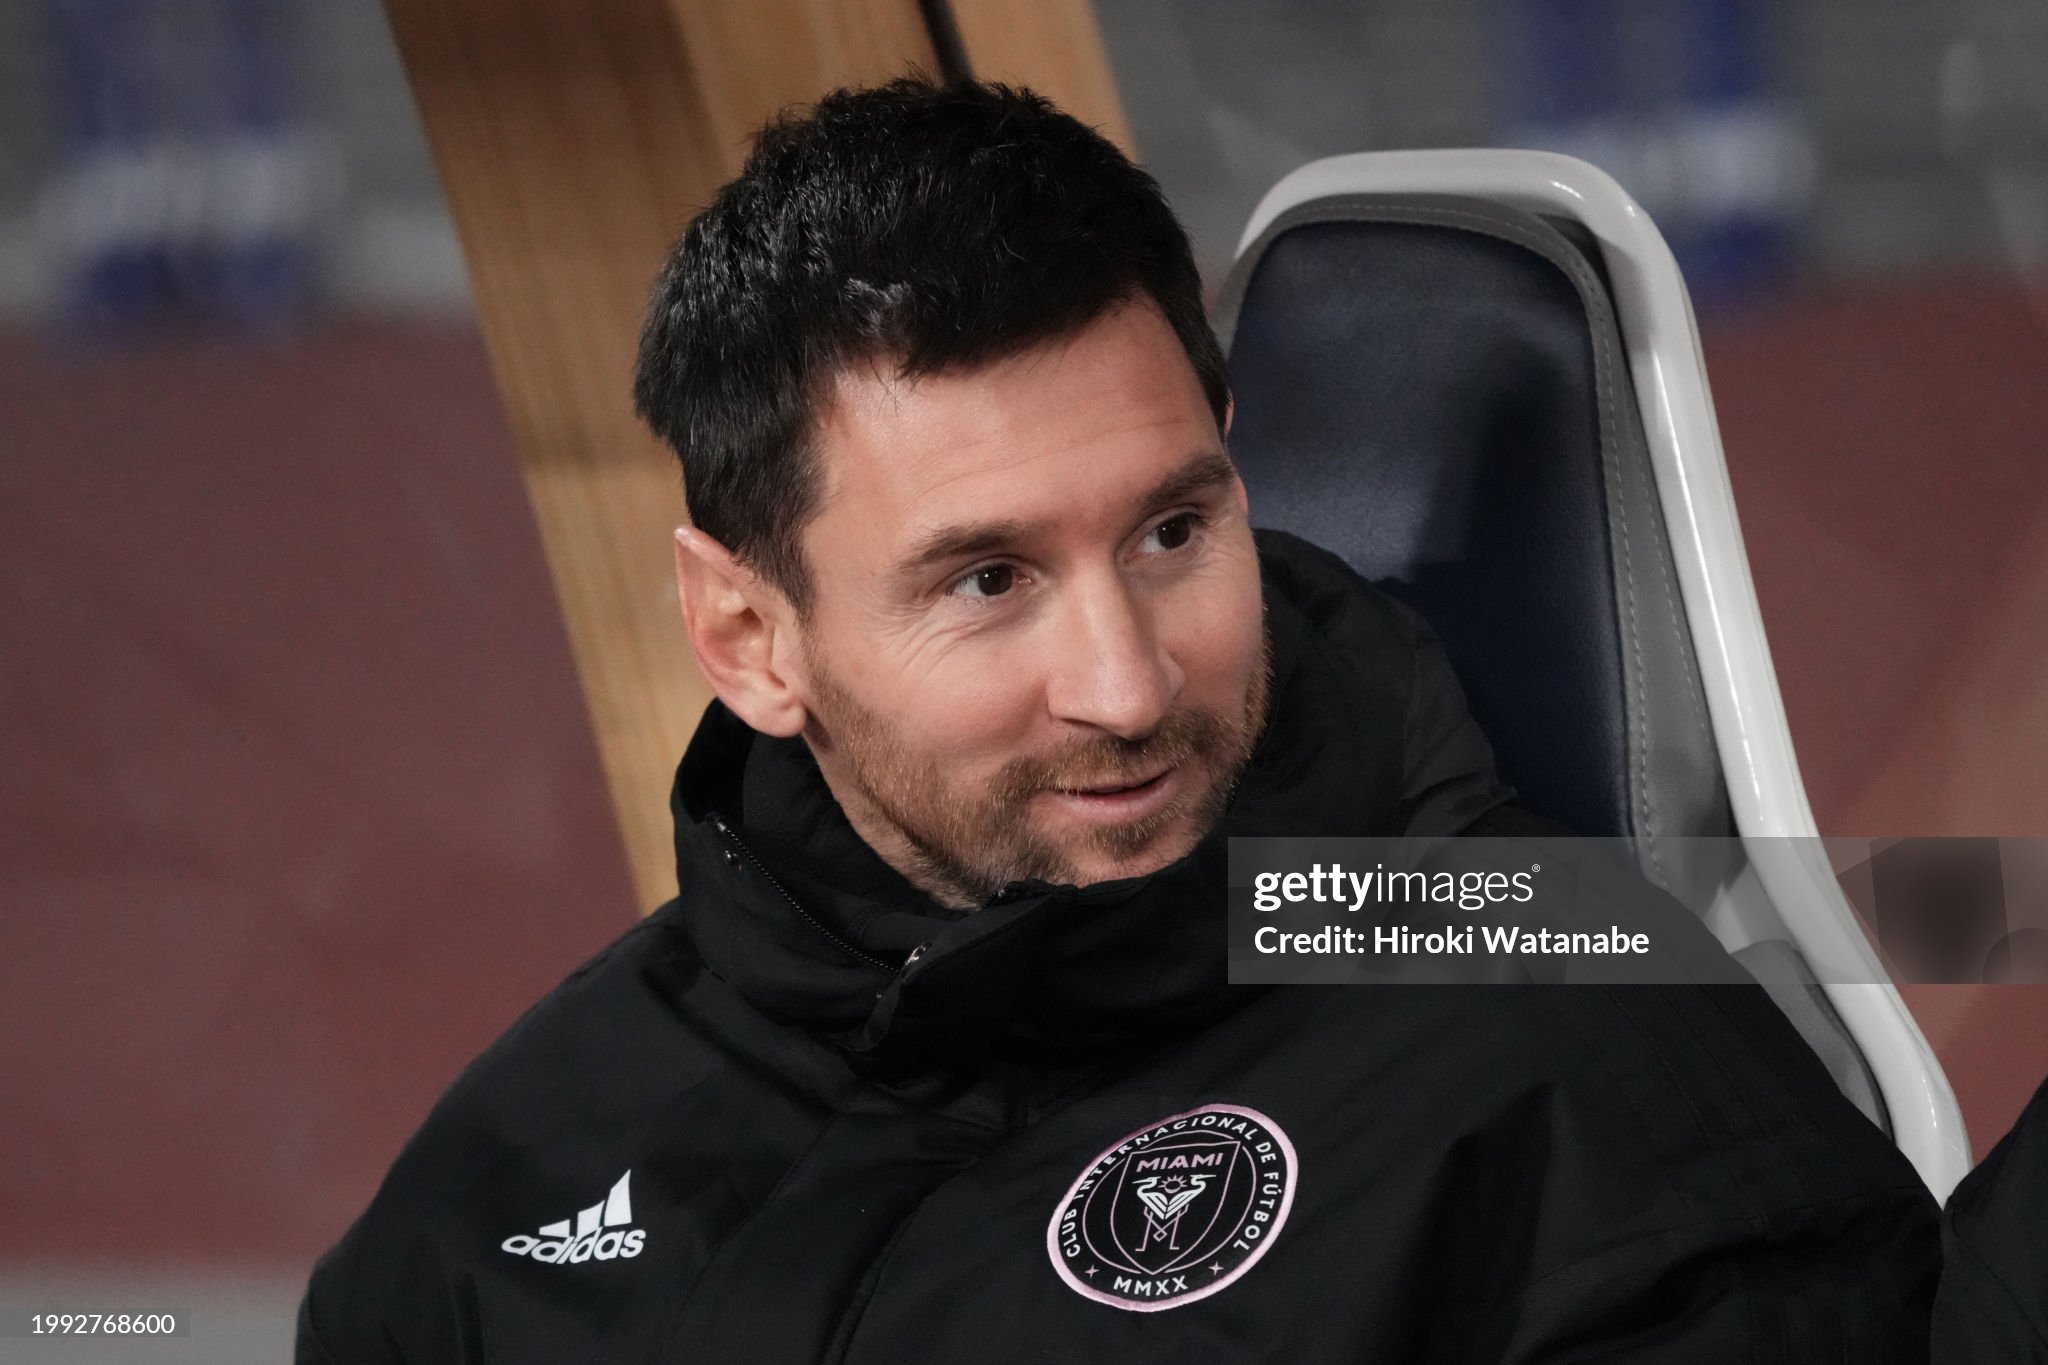 Hong Kong fans receive refund after Messi stayed on the bench